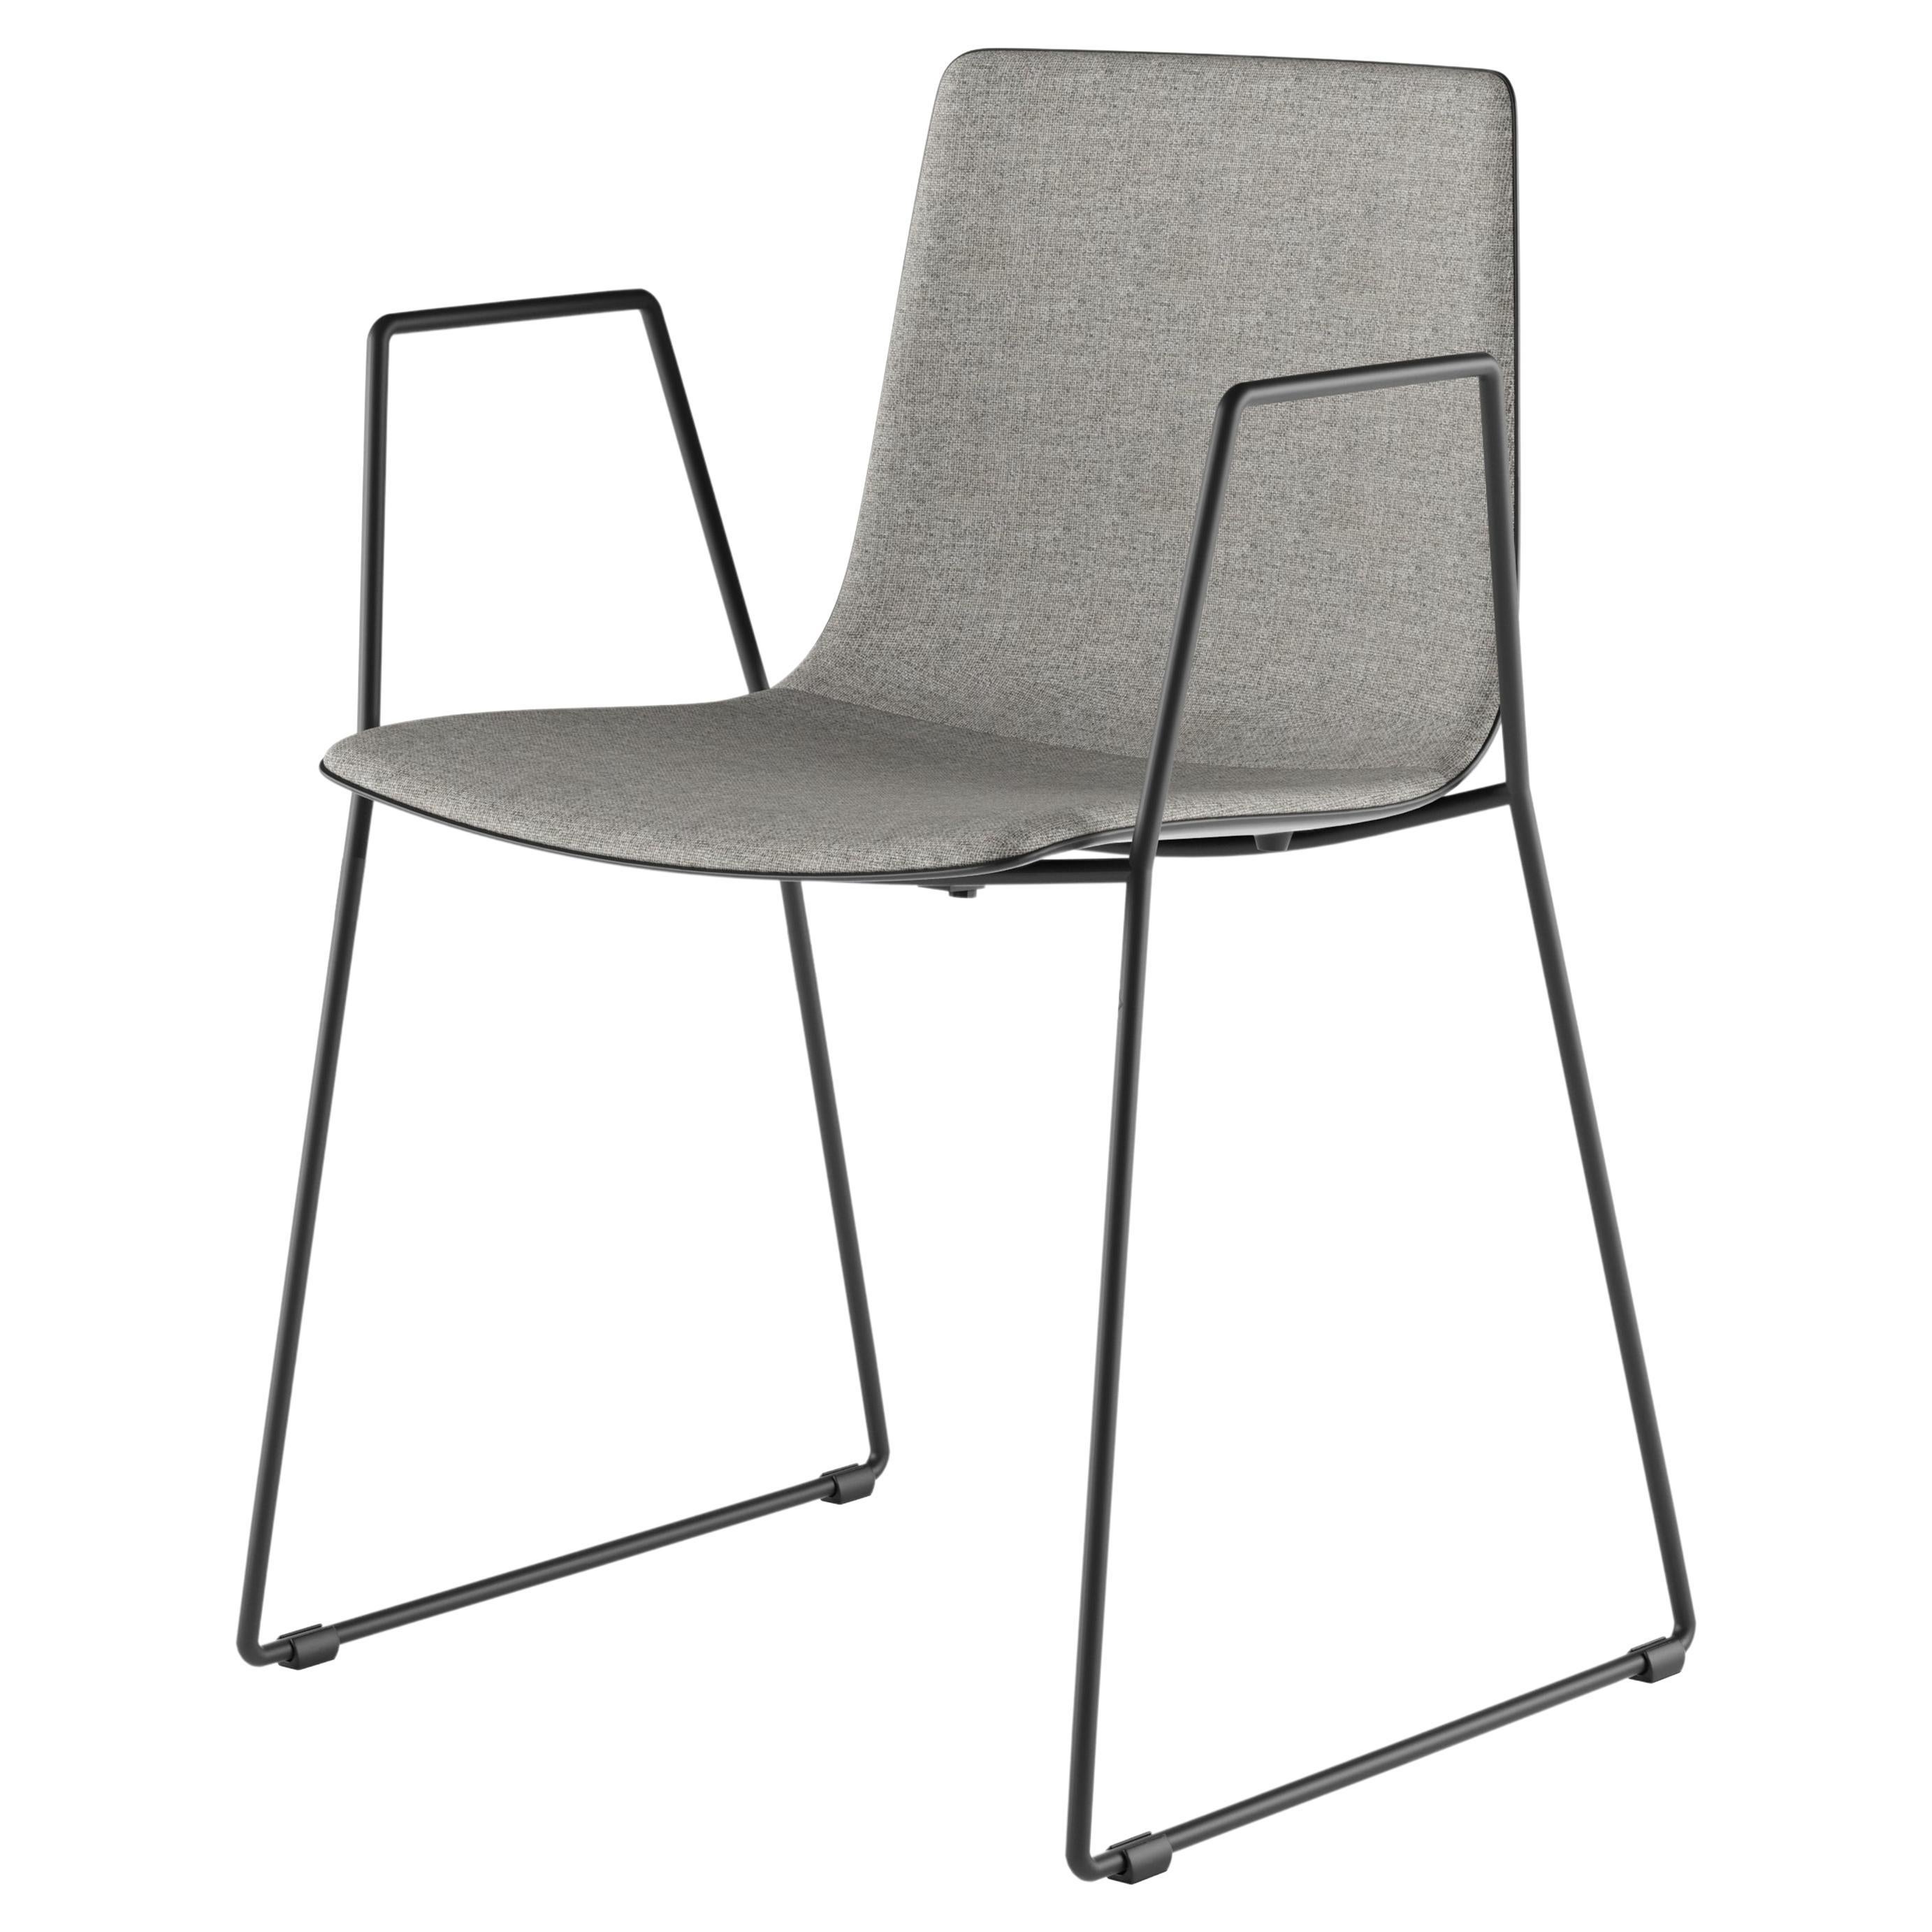 Alias 89B Slim Chair Sledge Arm with Medium Pad in Grey & Lacquered Steel Frame For Sale